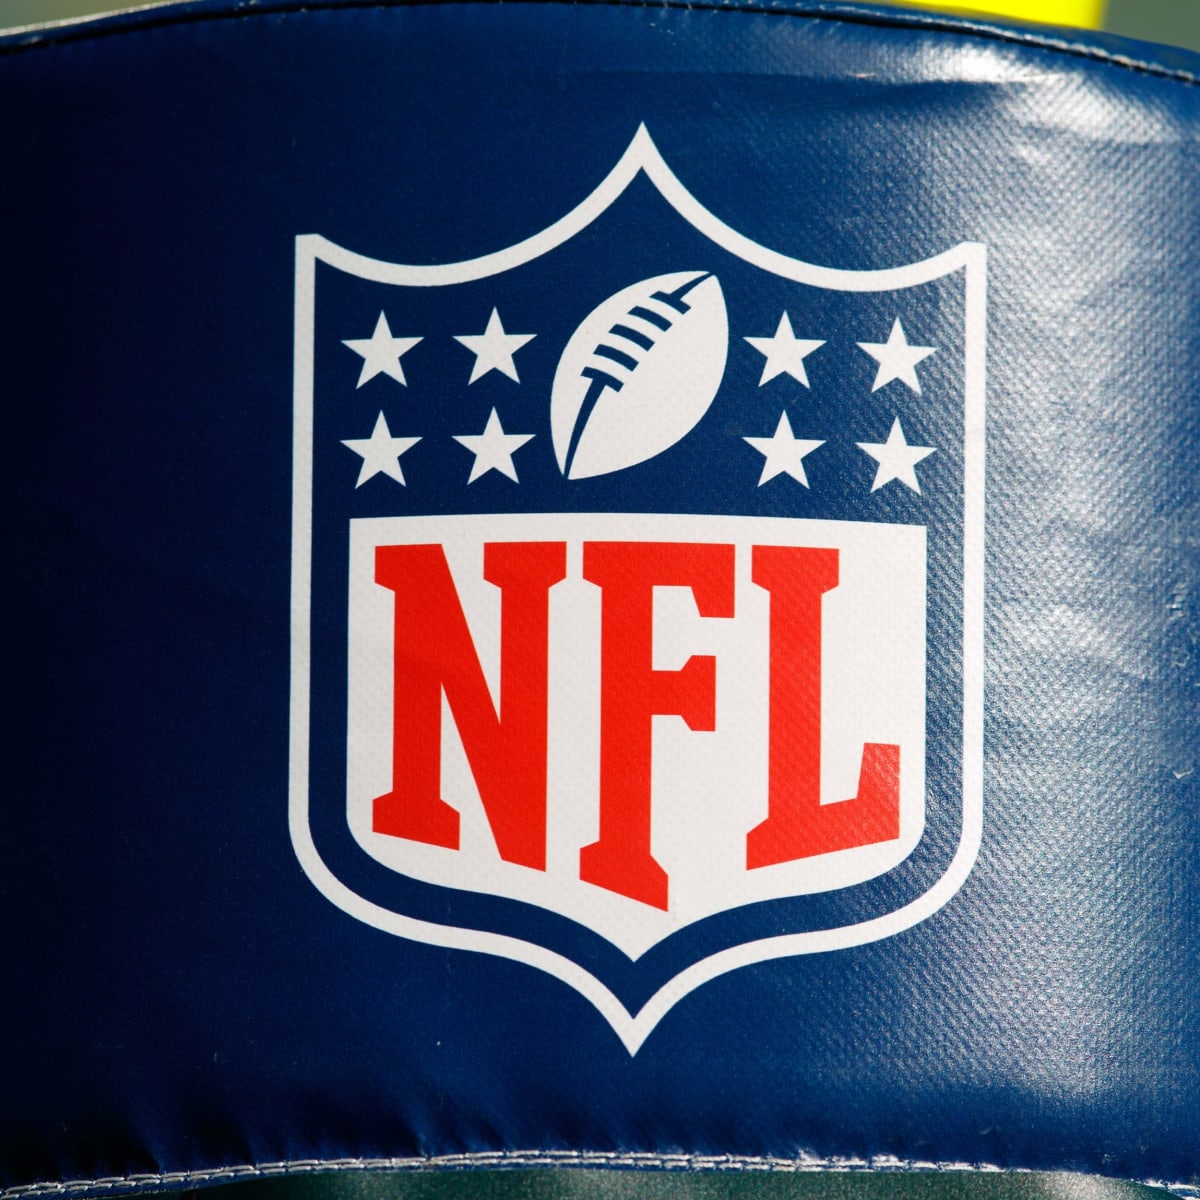 CBS Sports, Nickelodeon Set for NFL Wild Card Game